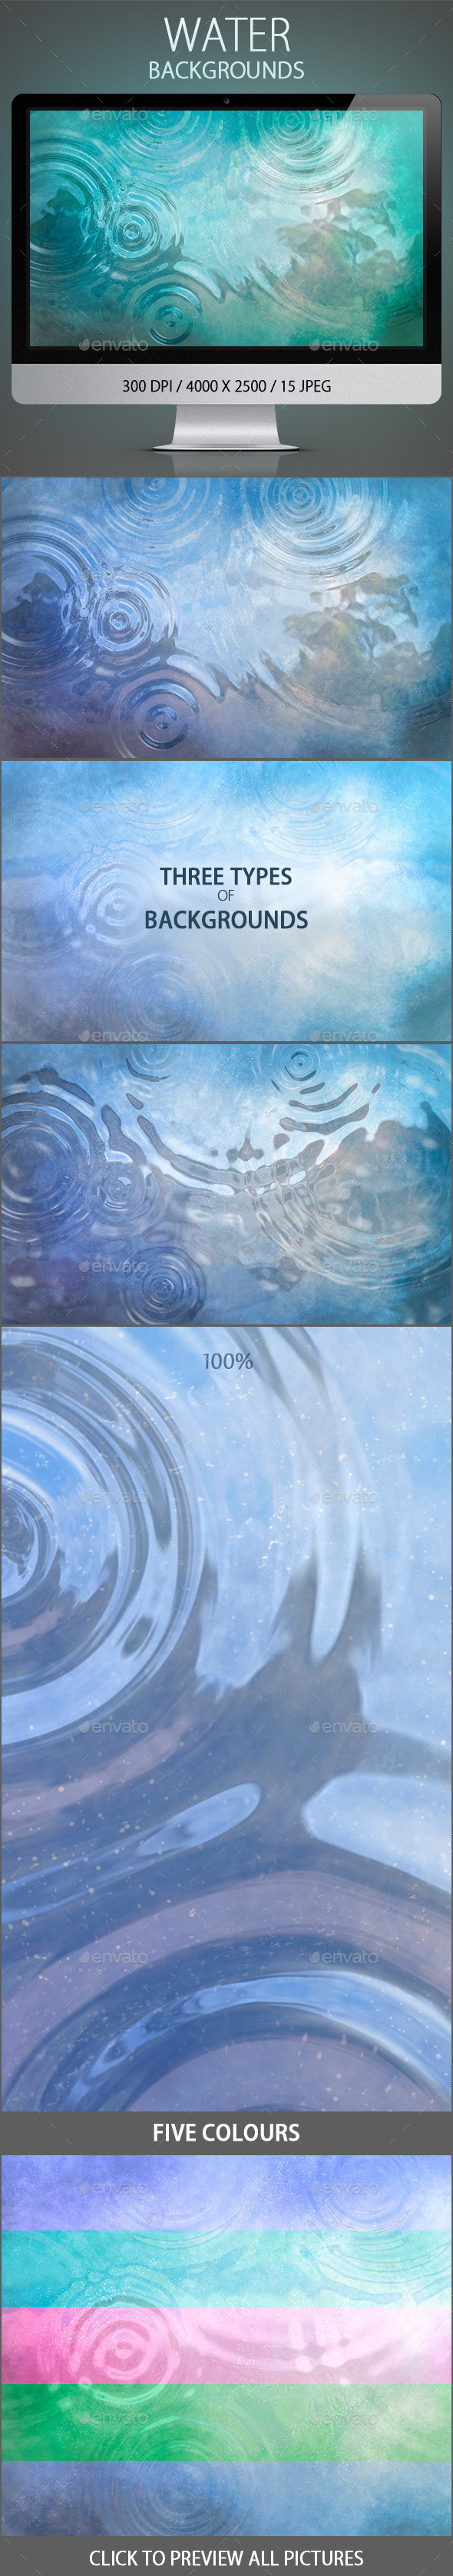 Title water backgrounds